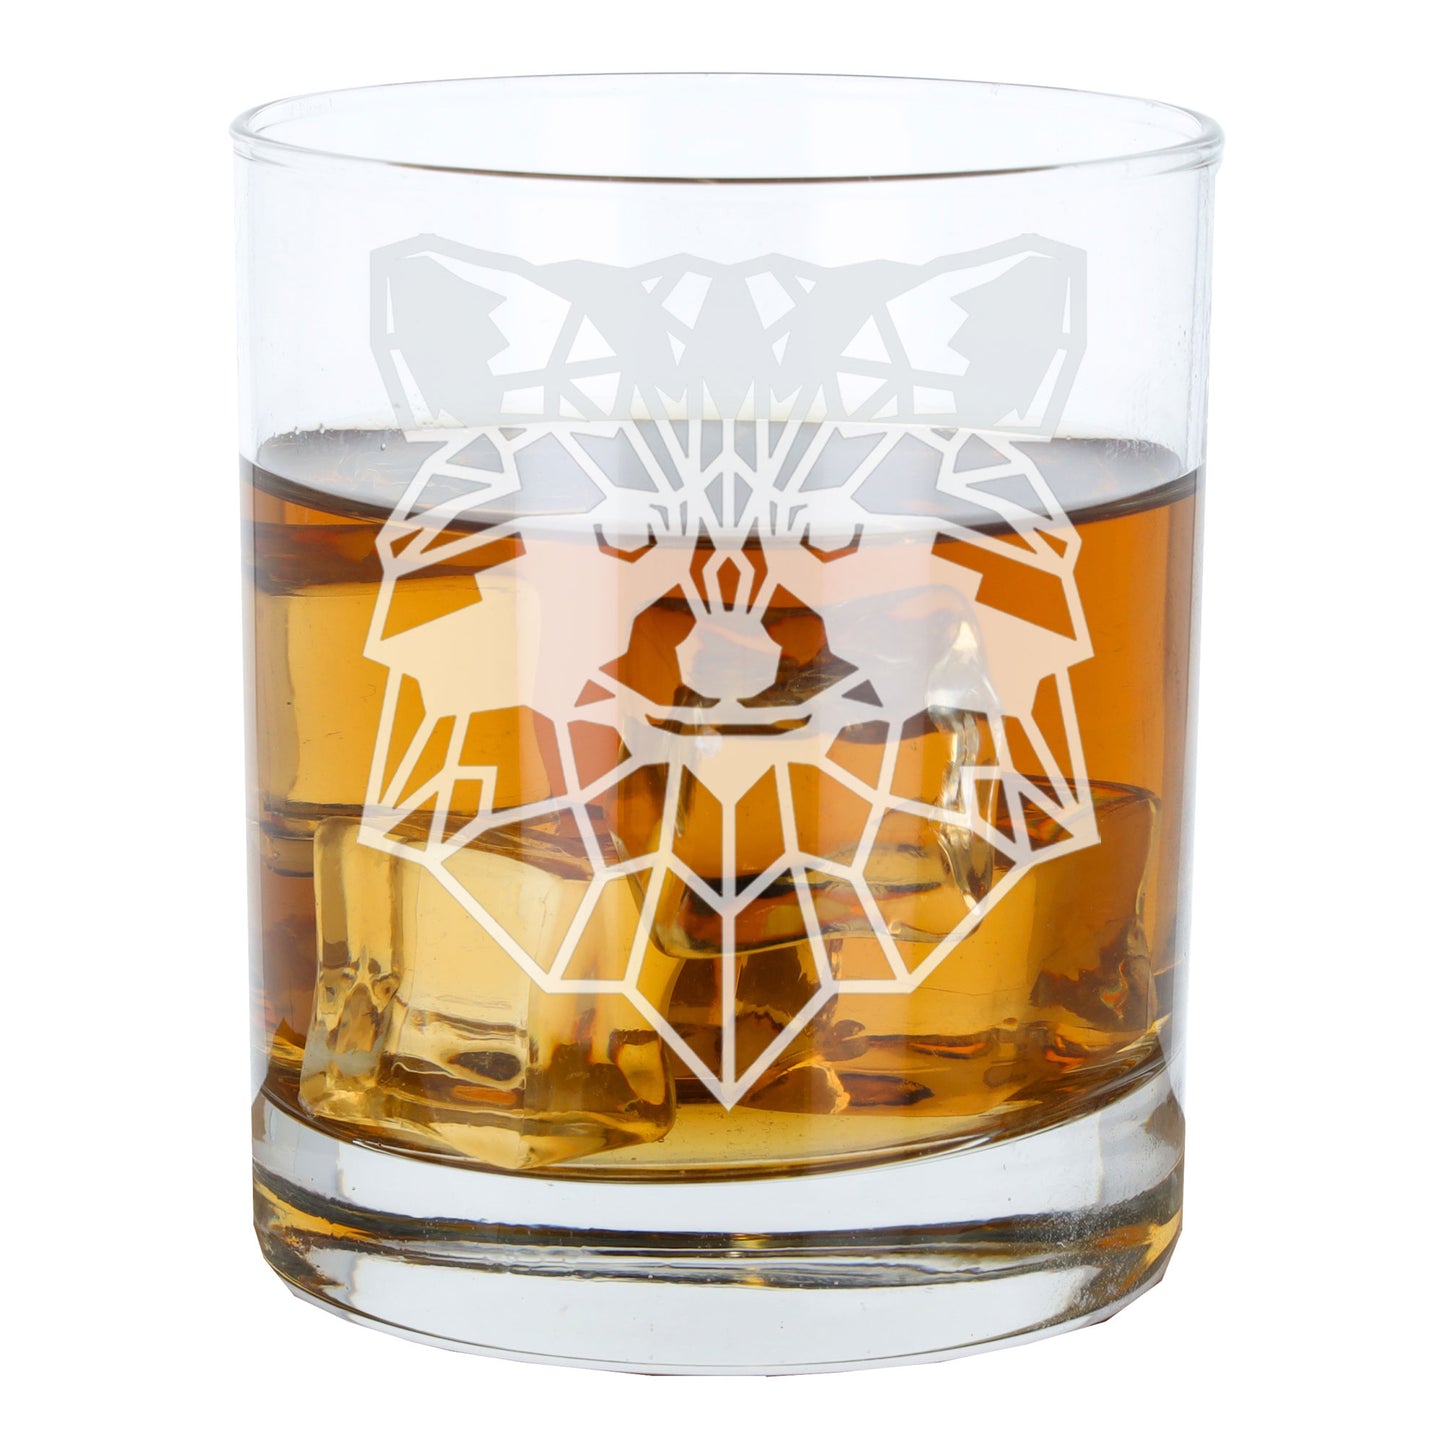 Racoon Engraved Whisky Glass  - Always Looking Good -   